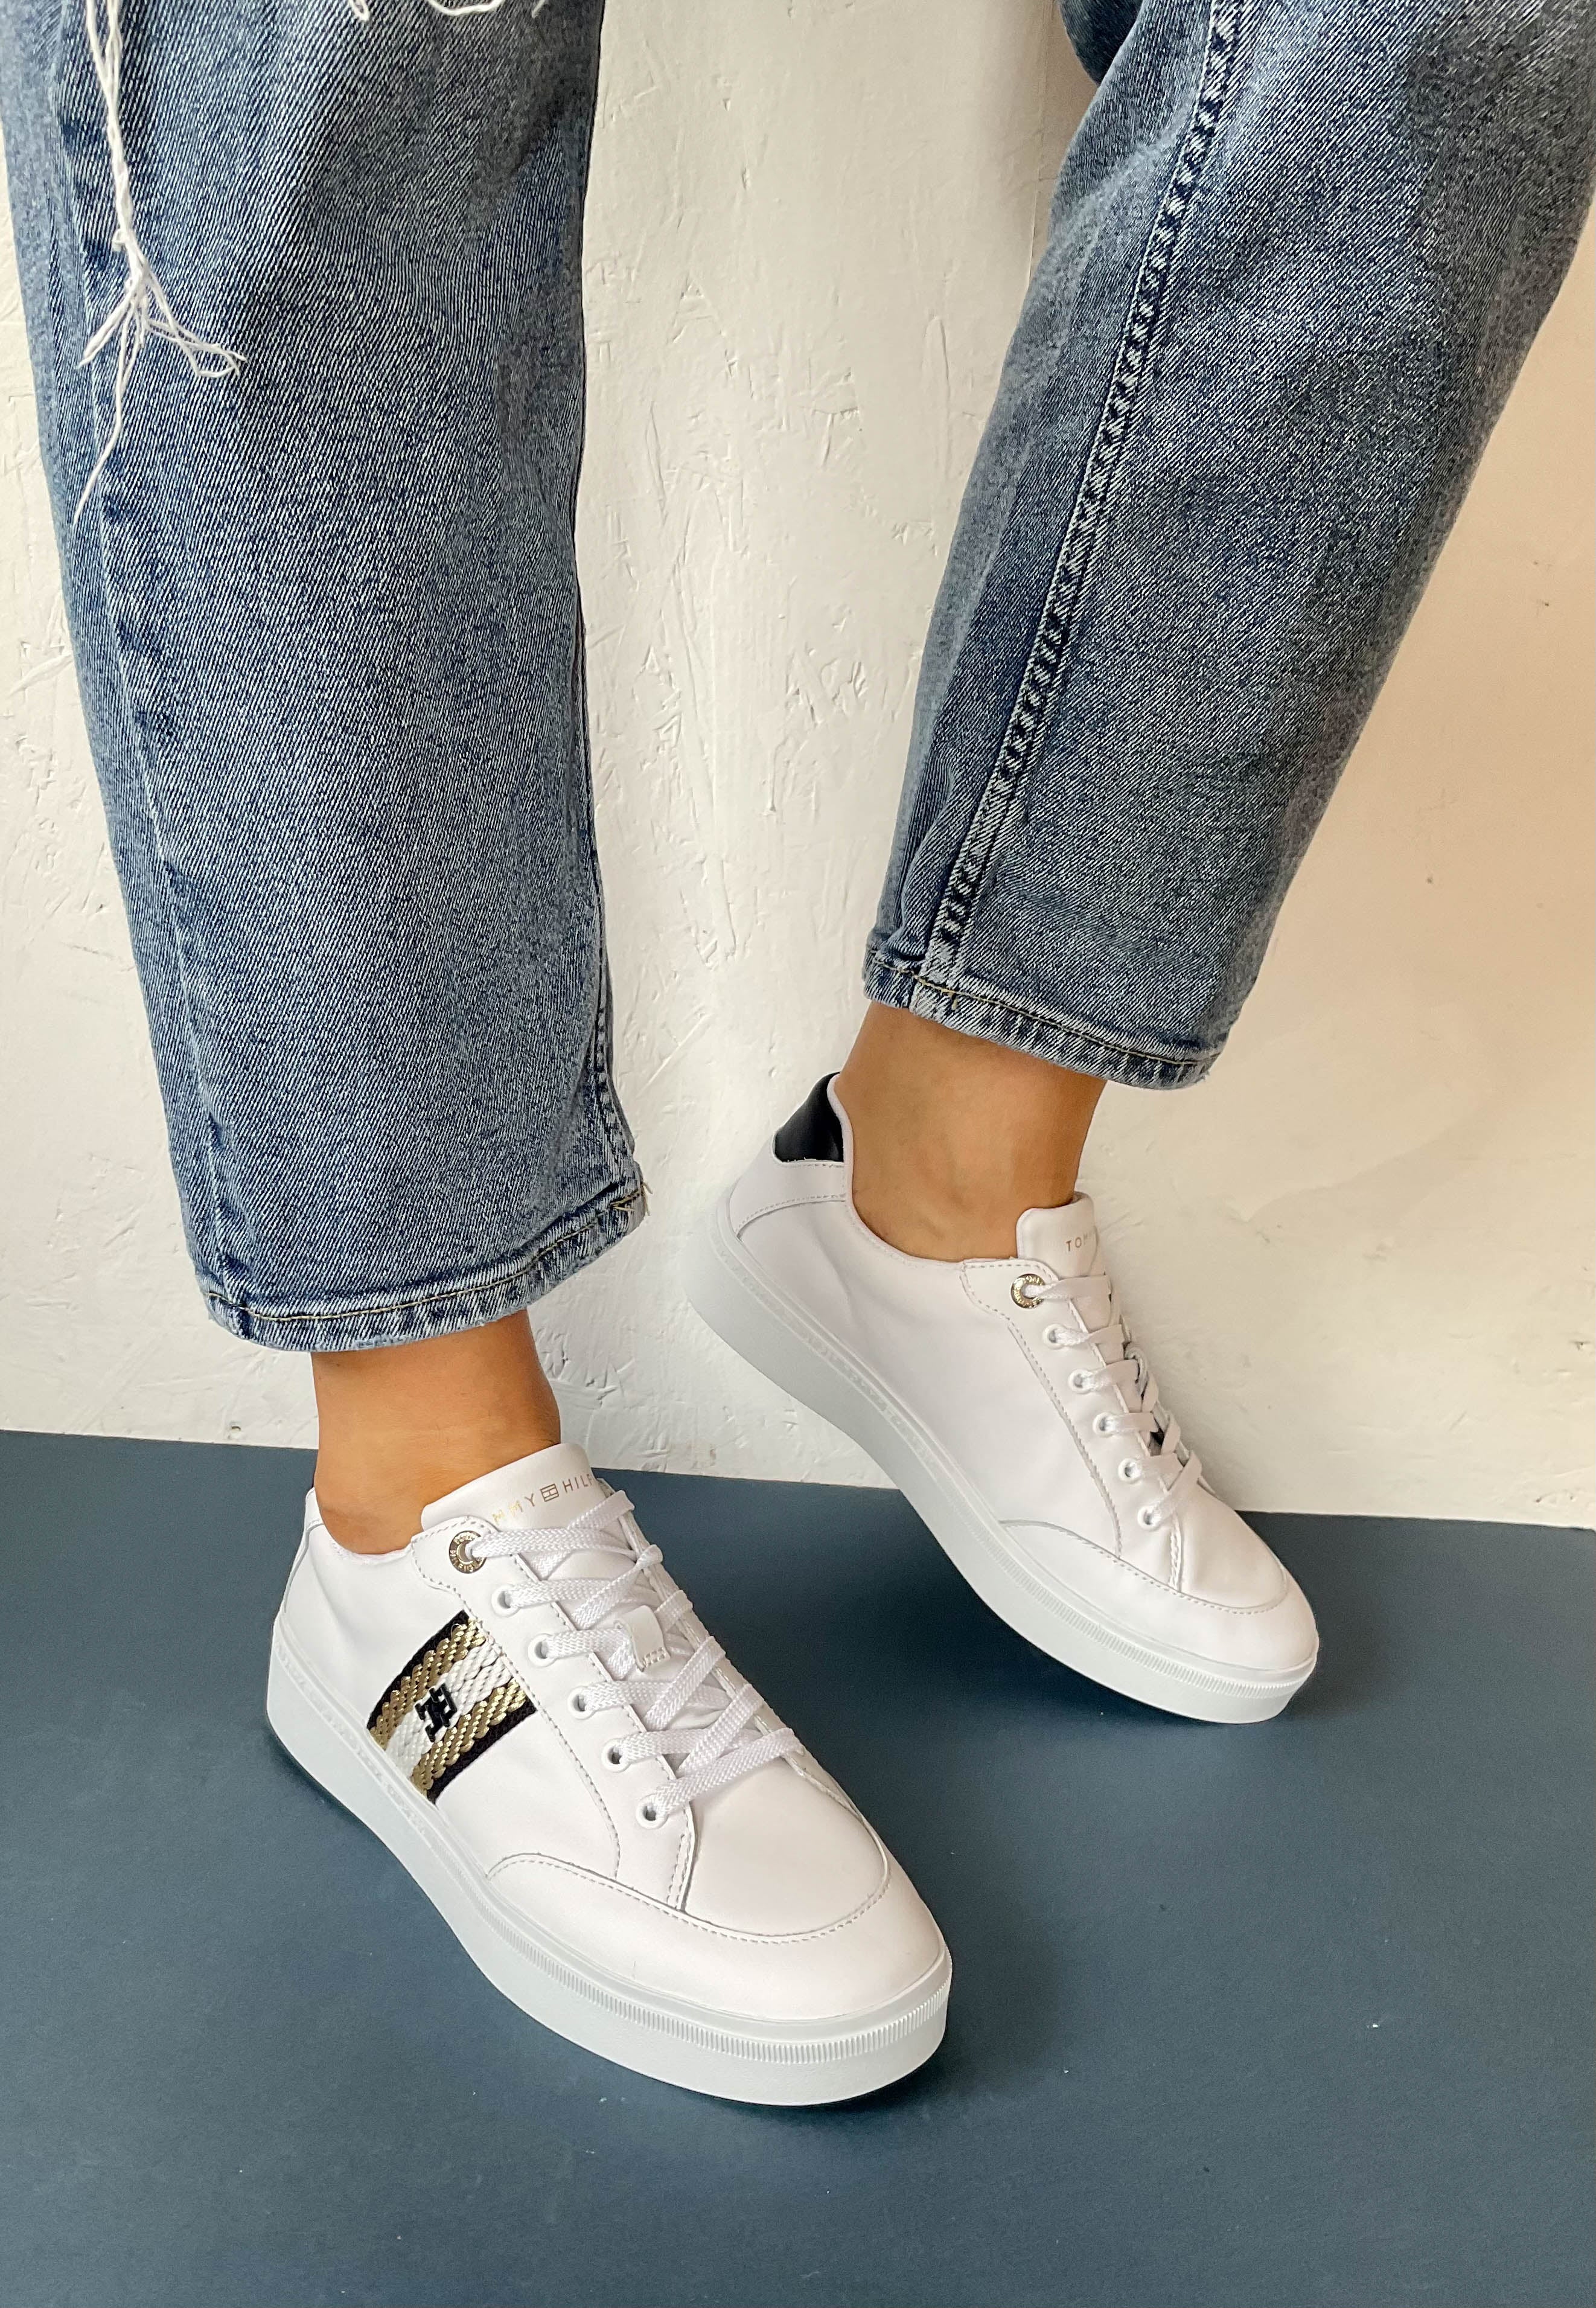 Tommy hilfiger white leather shoes